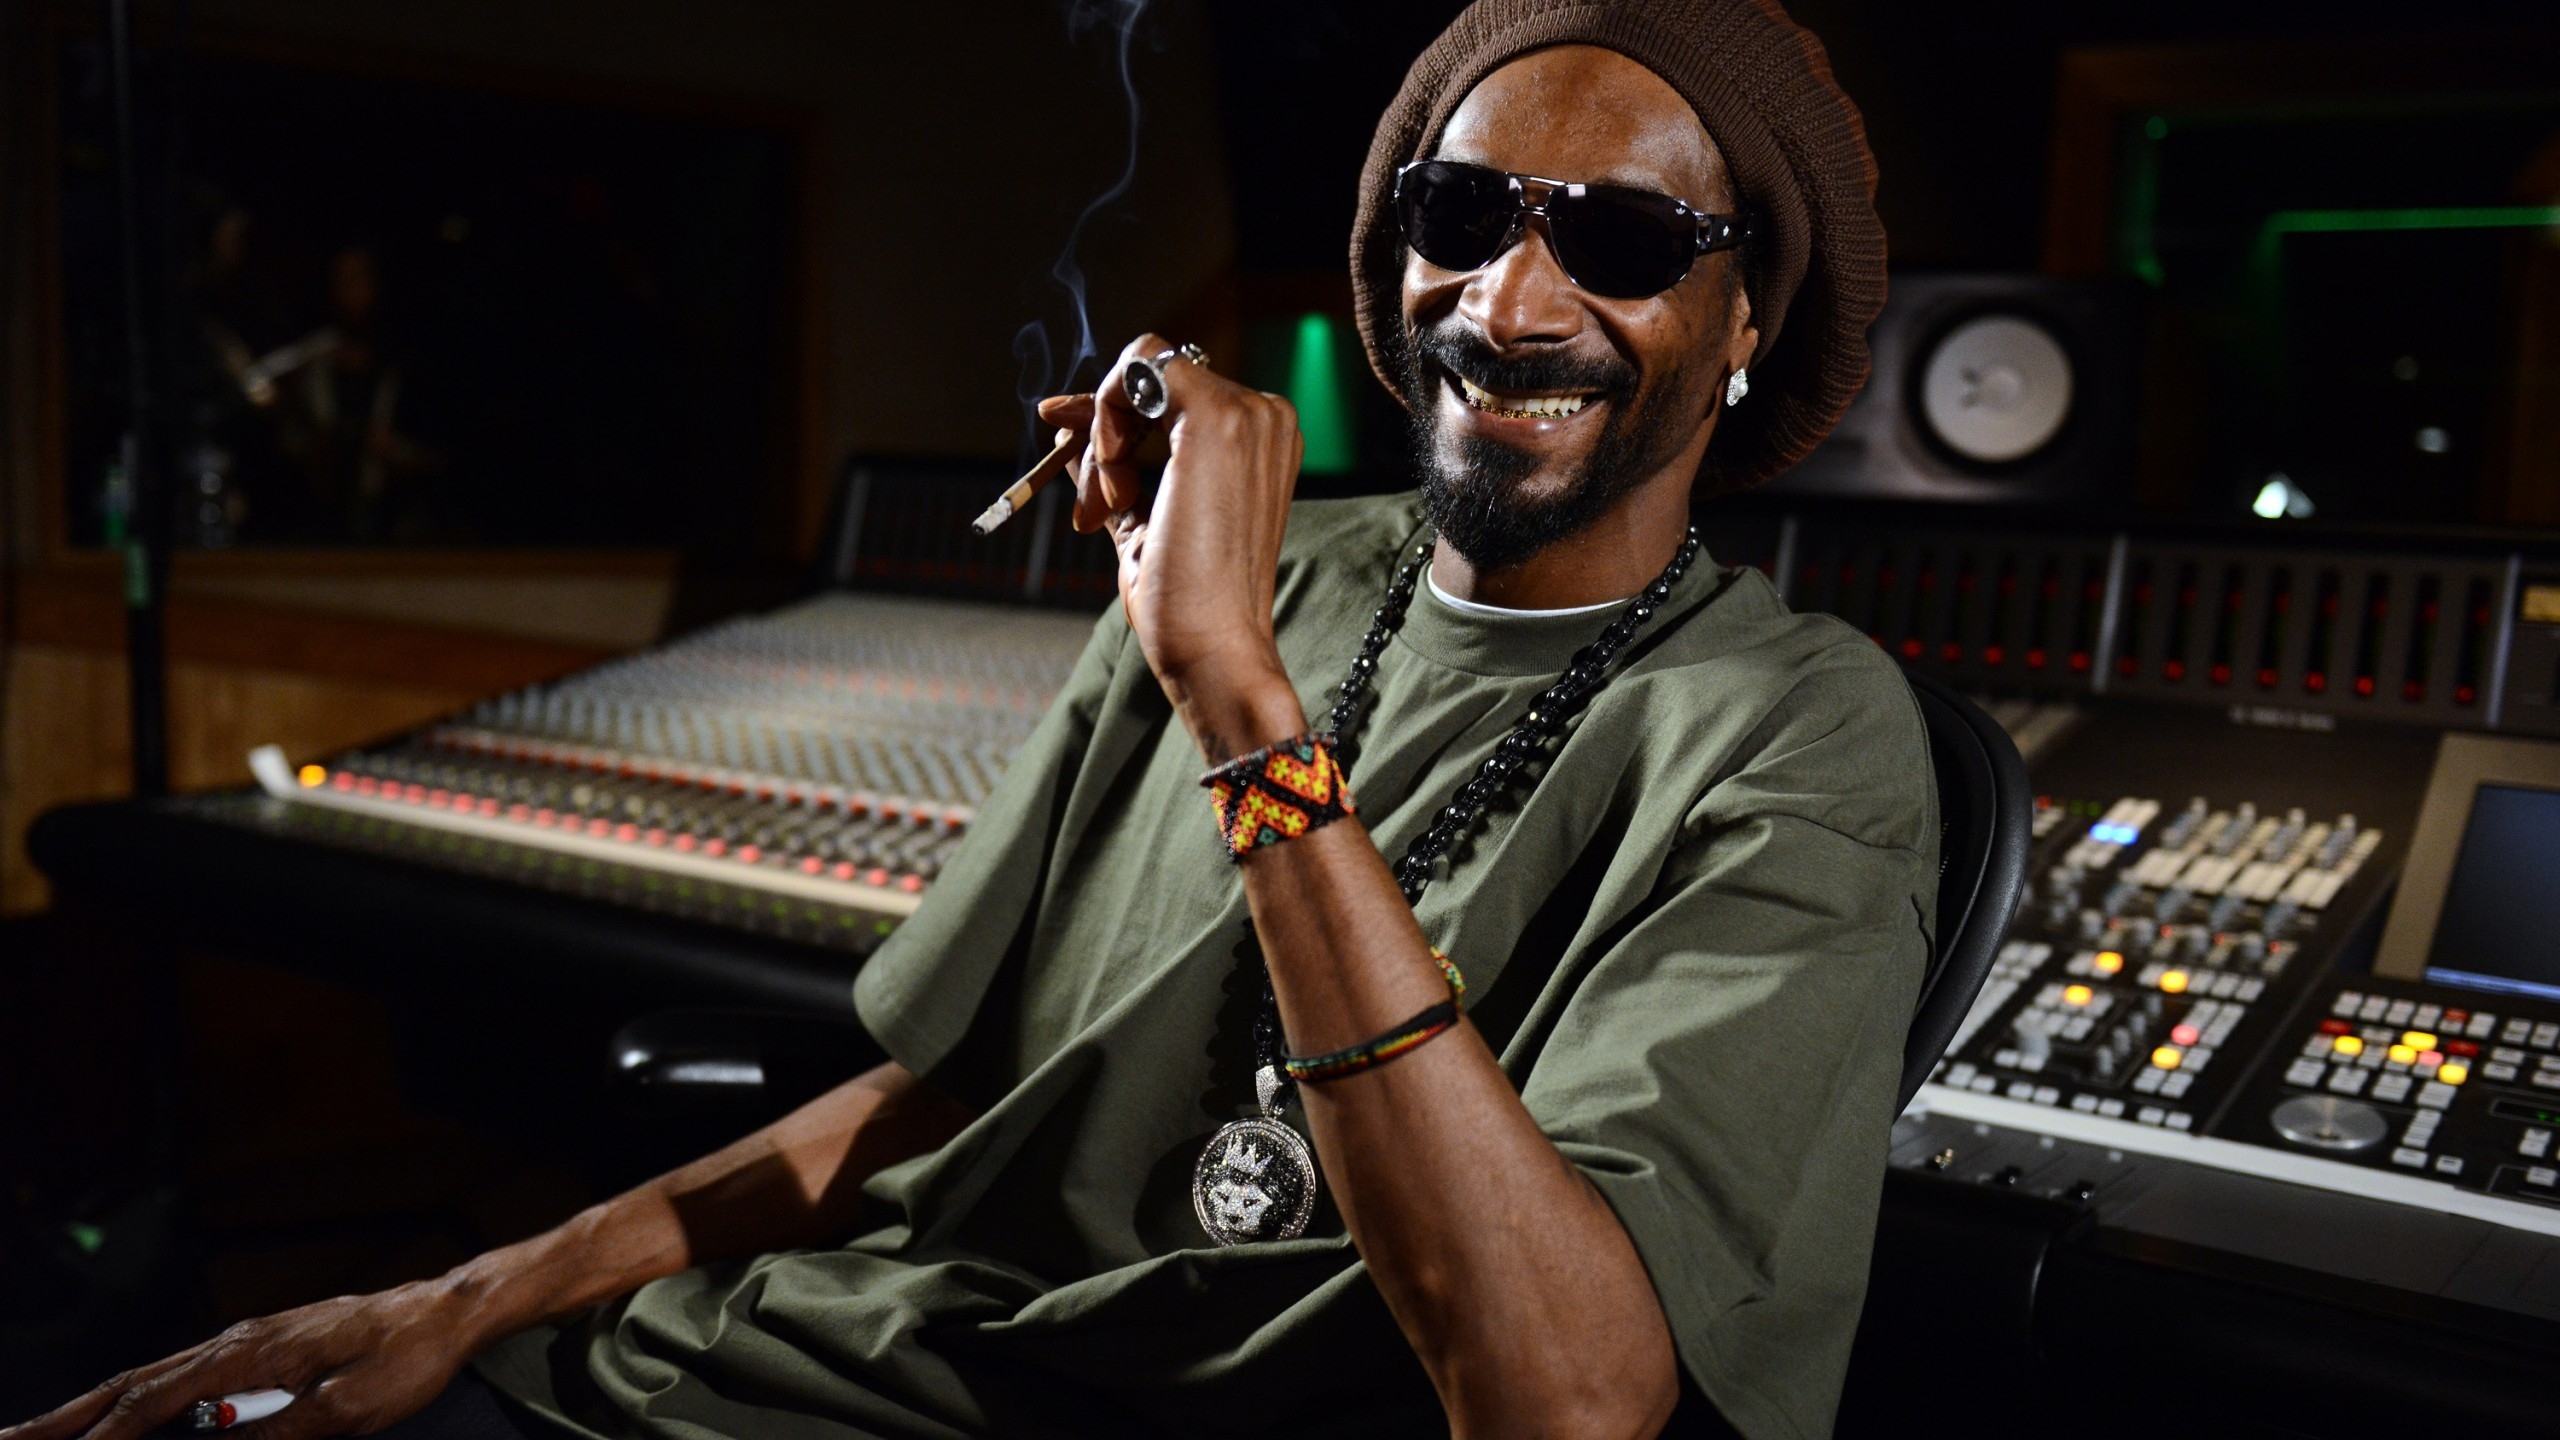 Snoop Dogg Smile for 2560x1440 HDTV resolution